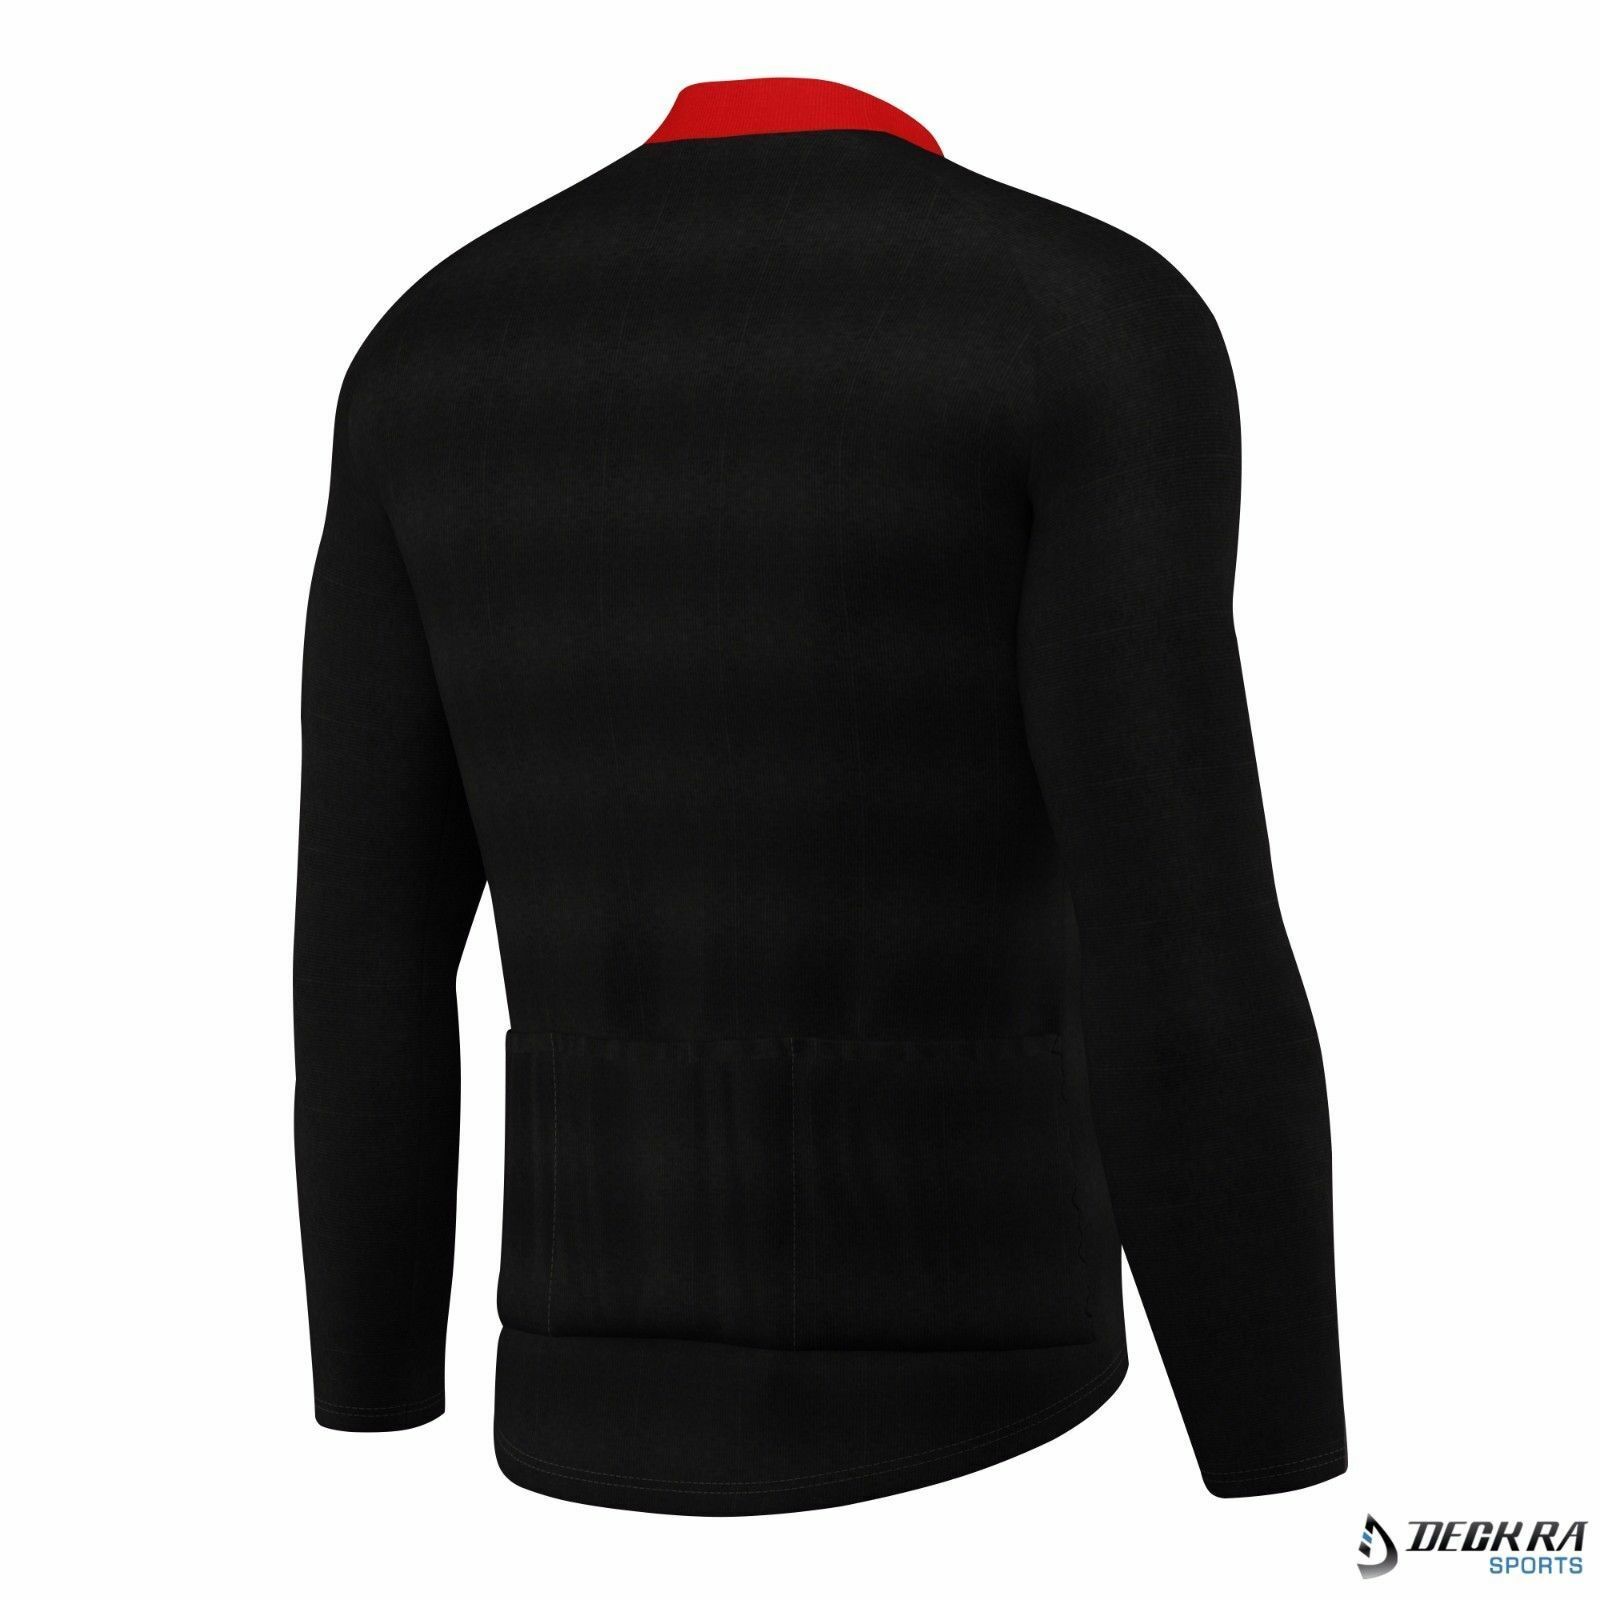 Mens Cycling Jersey Long Sleeves Black/Red